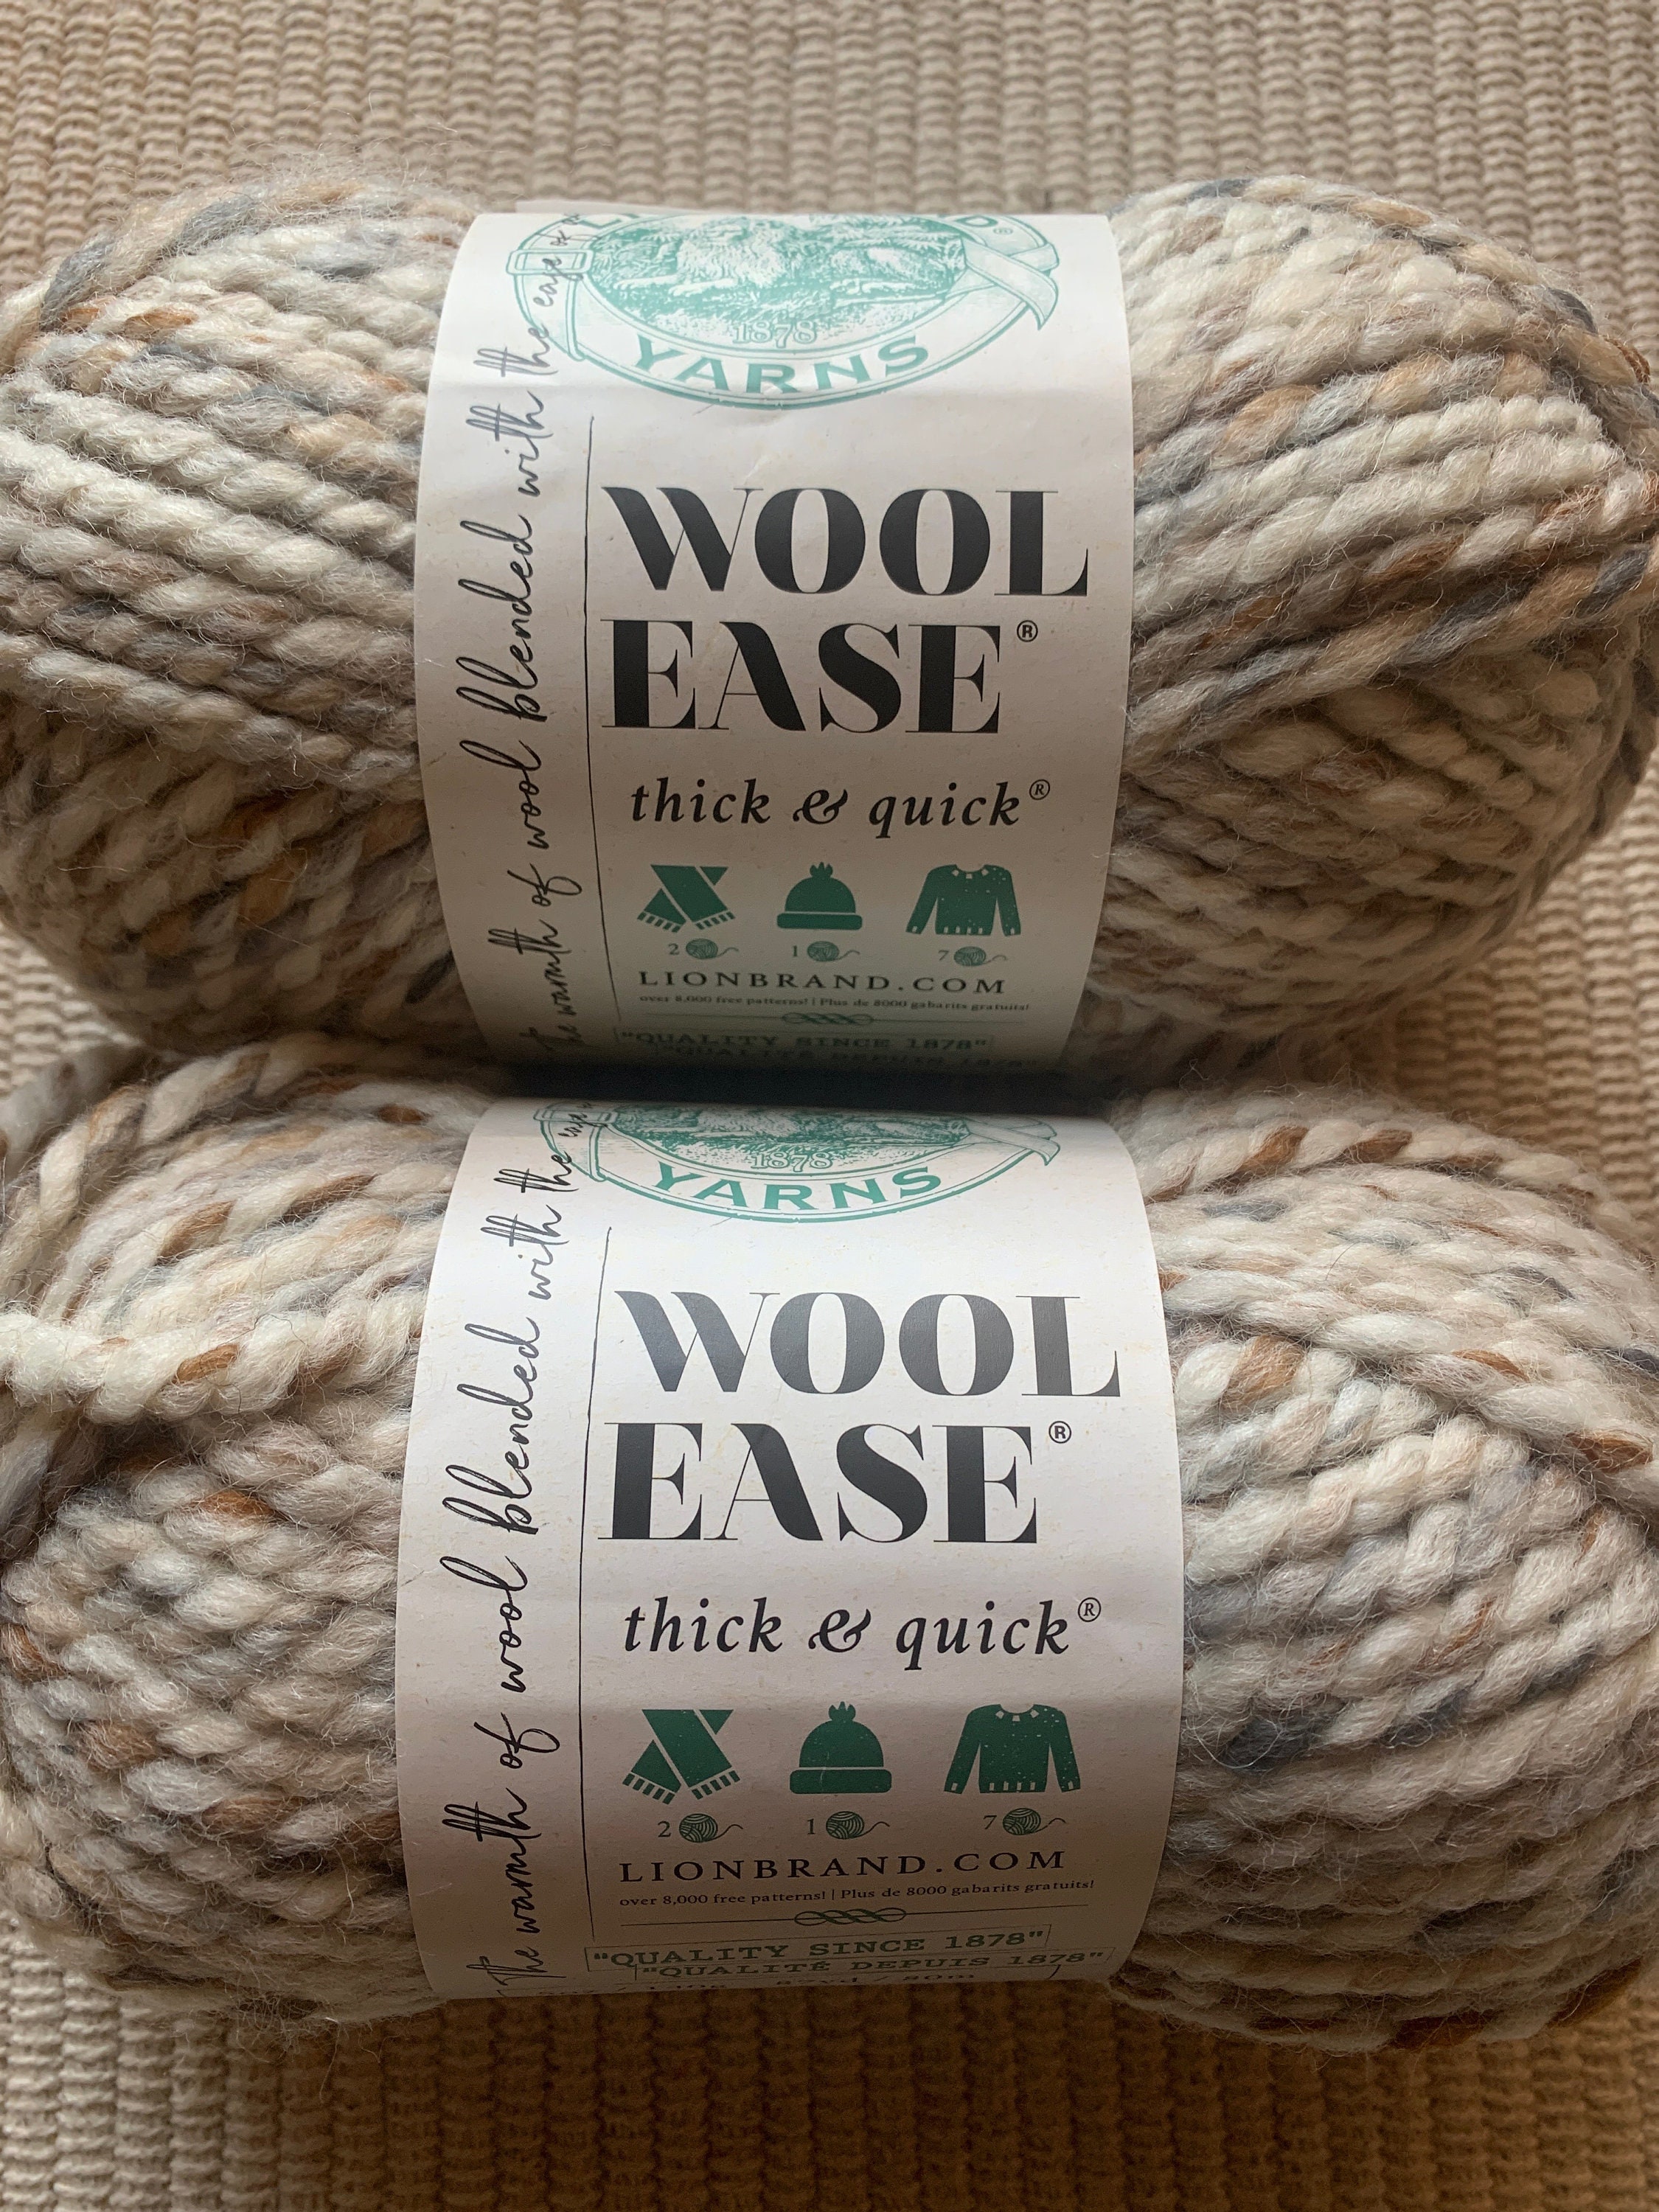 Lion Brand Yarn lion brand yarn wool-ease thick & quick yarn, soft and  bulky yarn for knitting, crocheting, and crafting, 3 pack, blossom